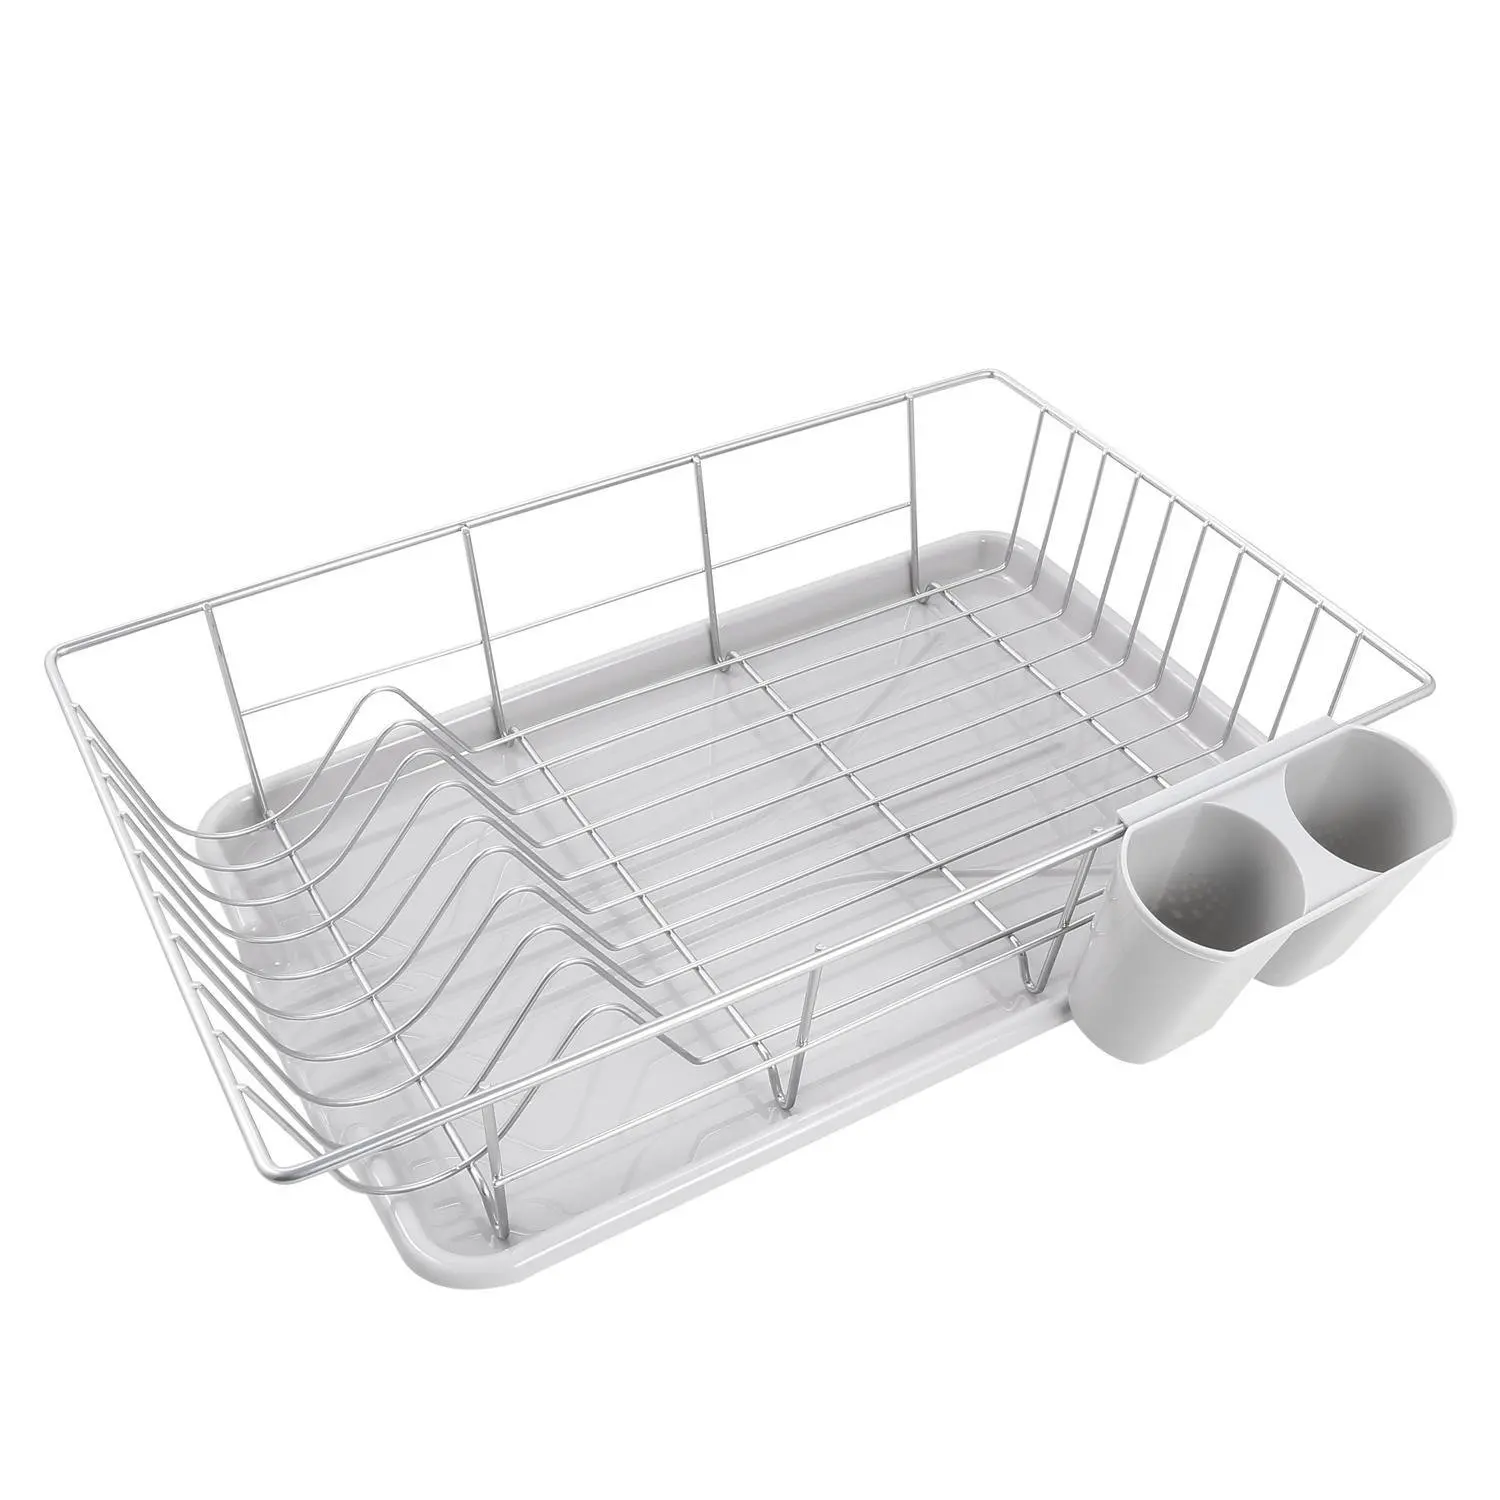 Cheap Large Dish Drainer Tray Find Large Dish Drainer Tray Deals On